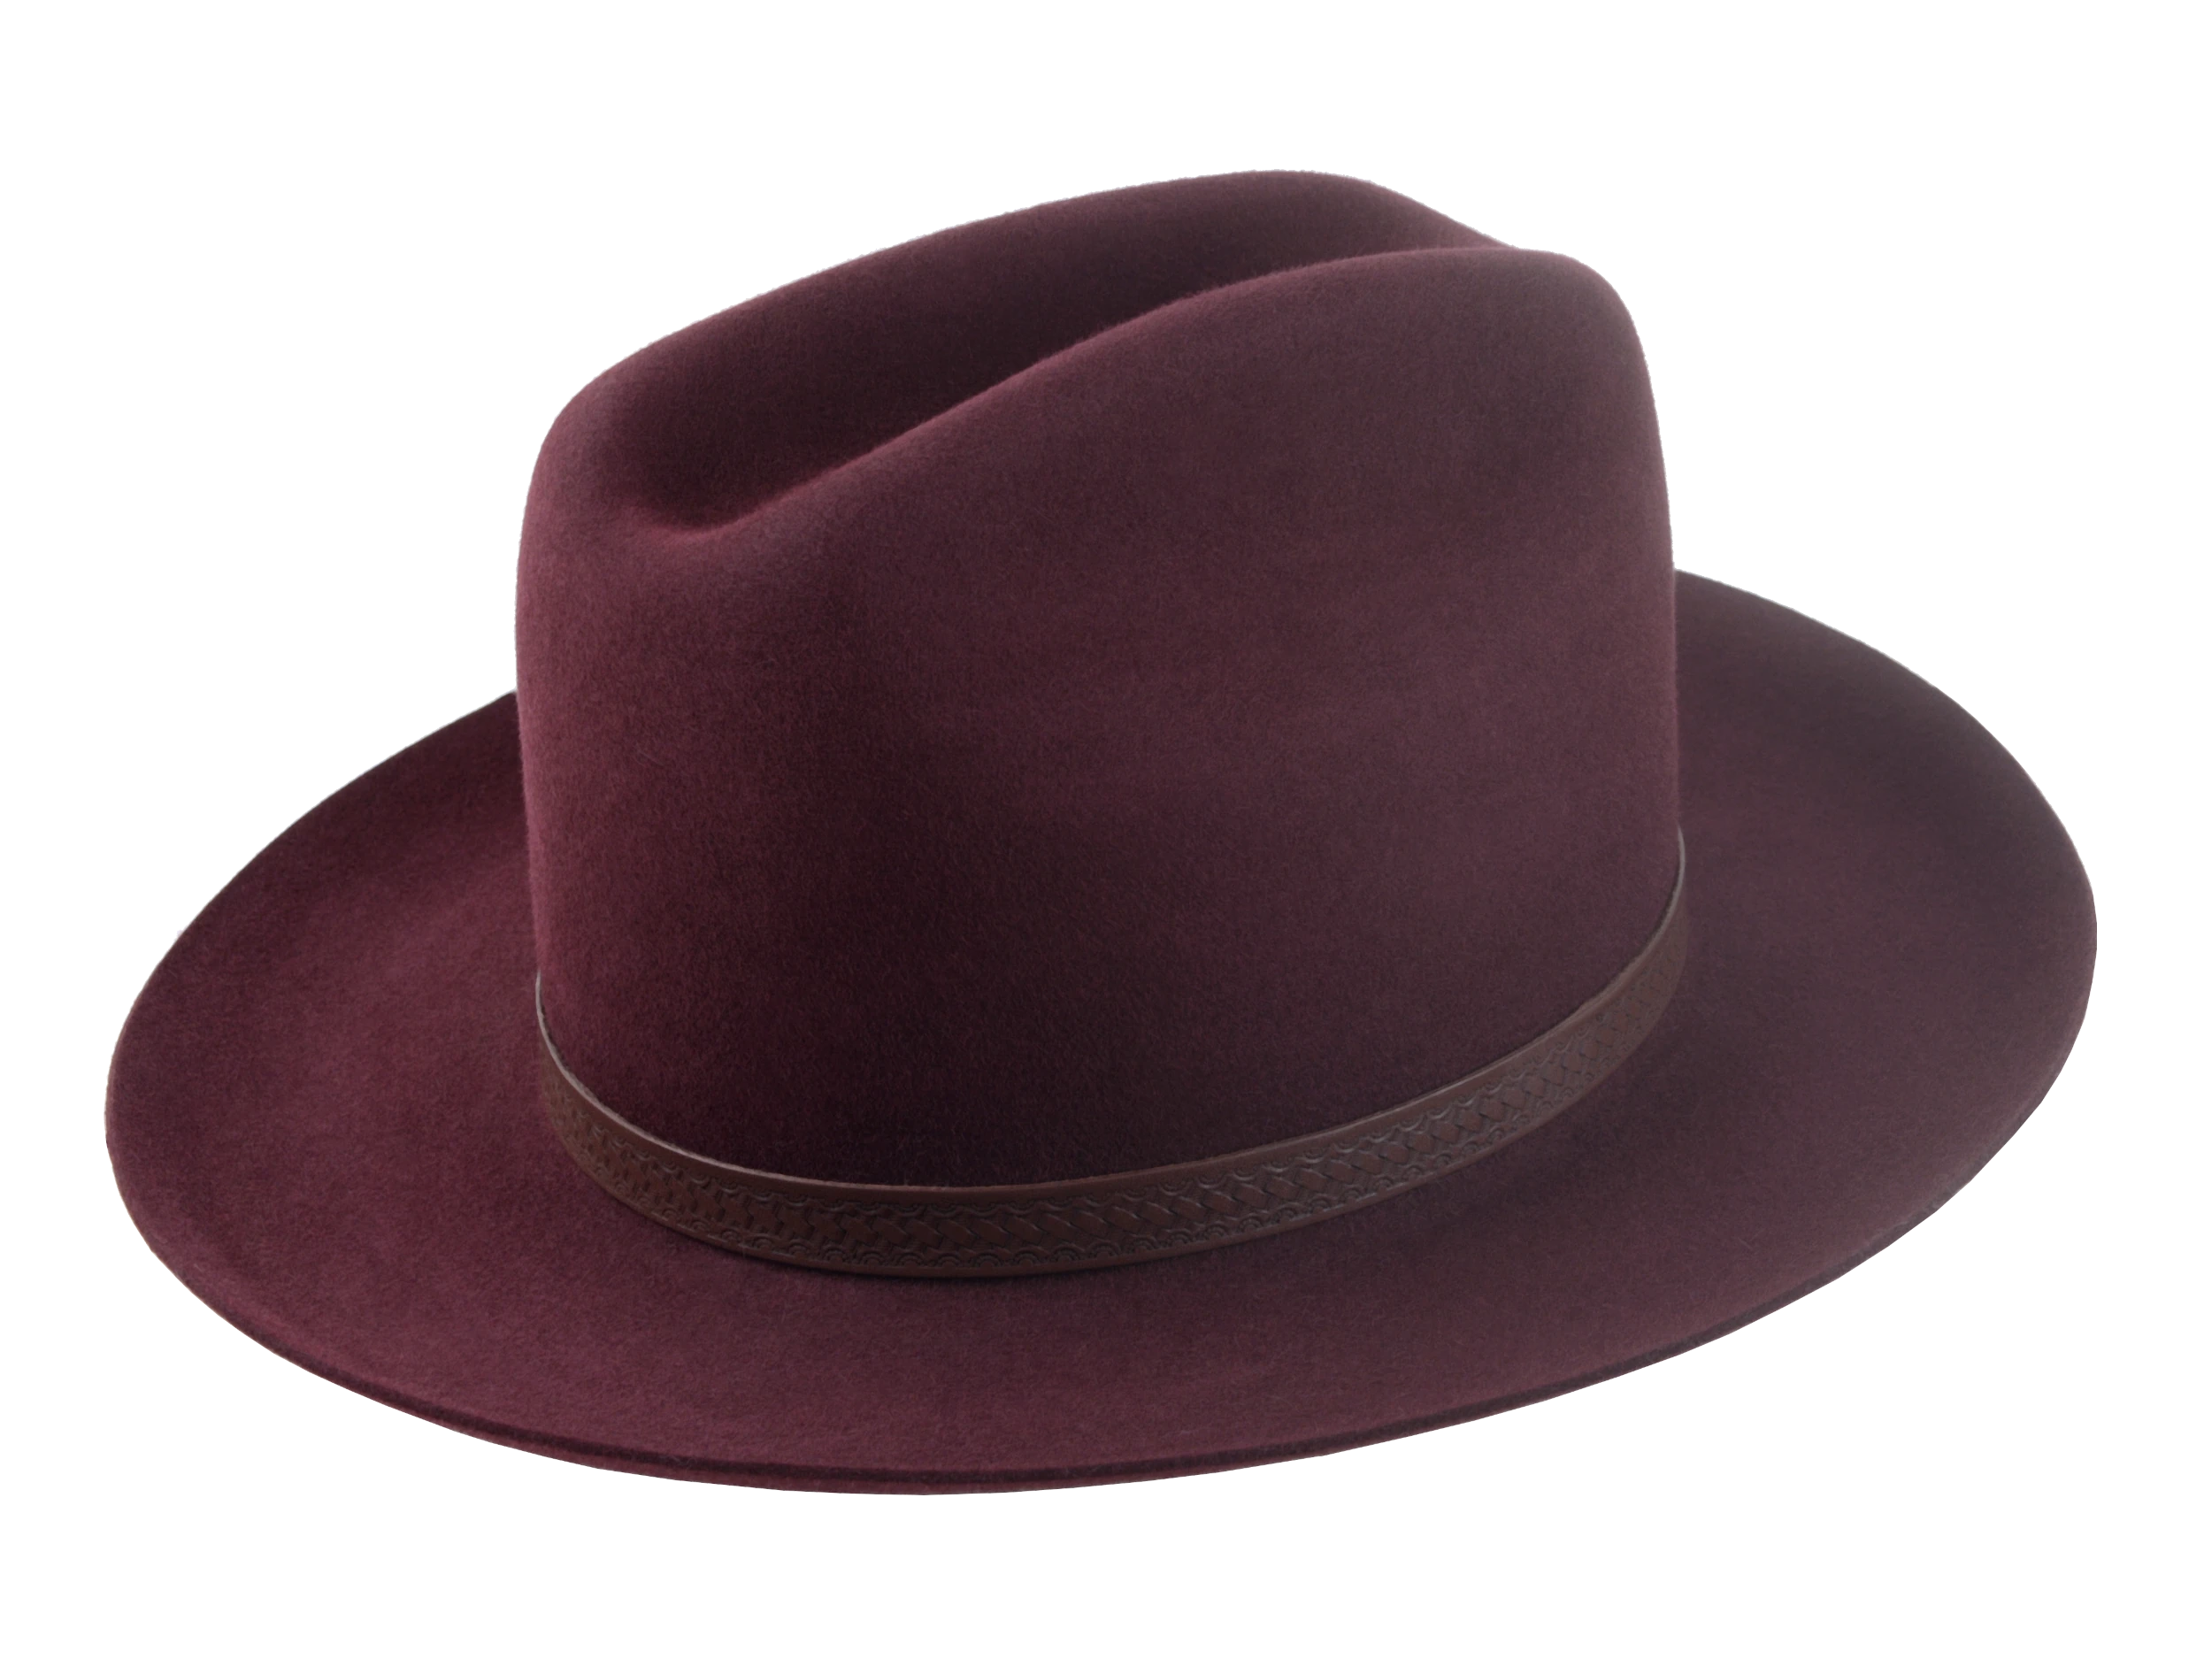 The Patriot: Angled perspective emphasizing the unique leather hat belt, adding a touch of sophistication | Agnoulita Hats